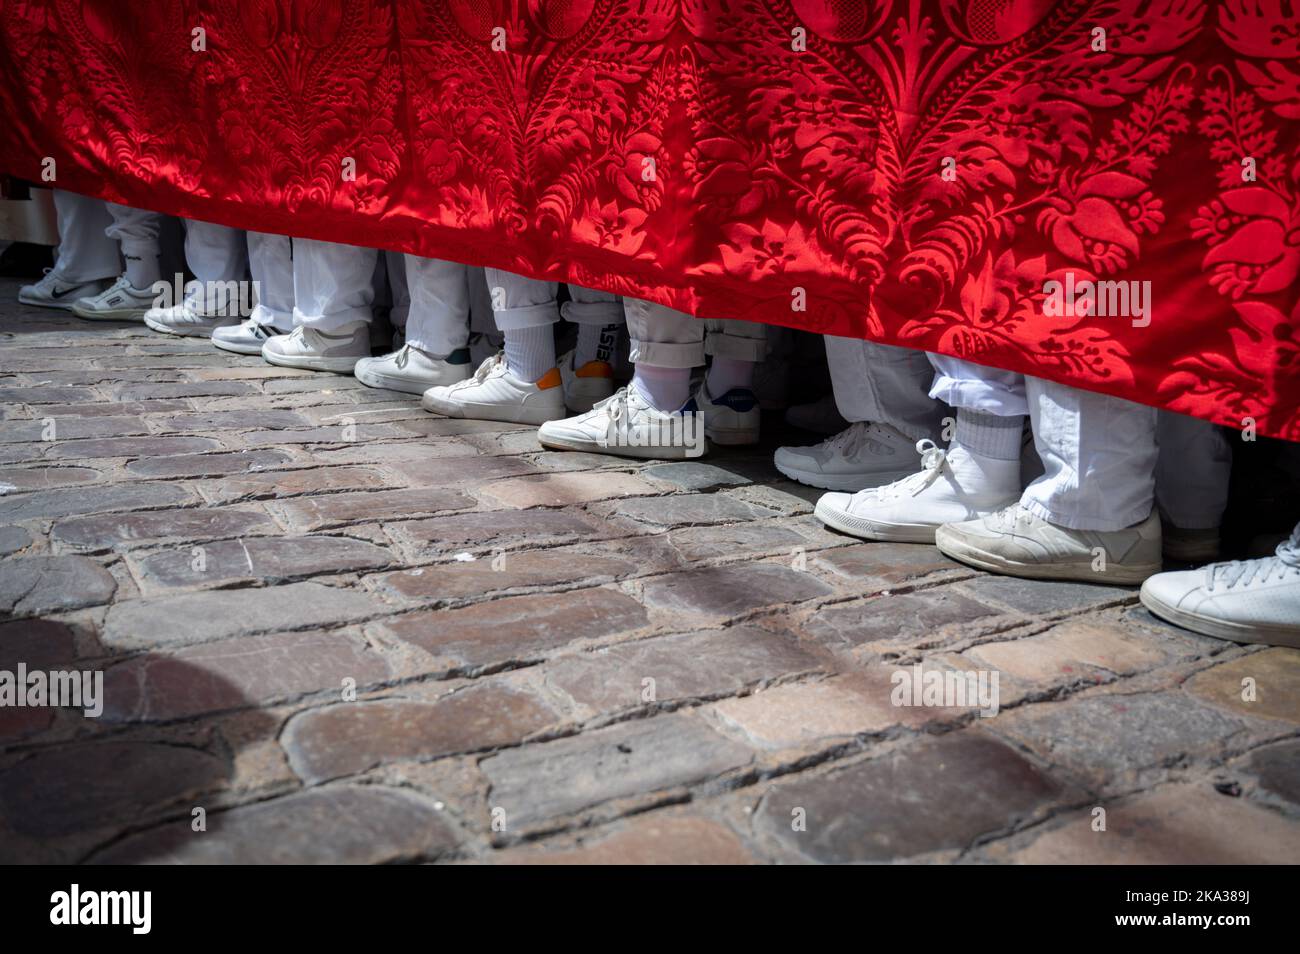 The feet of people carrying a heavy throne  in an Easter Parade during Holy week or semana santa in Cadiz, Spain Stock Photo